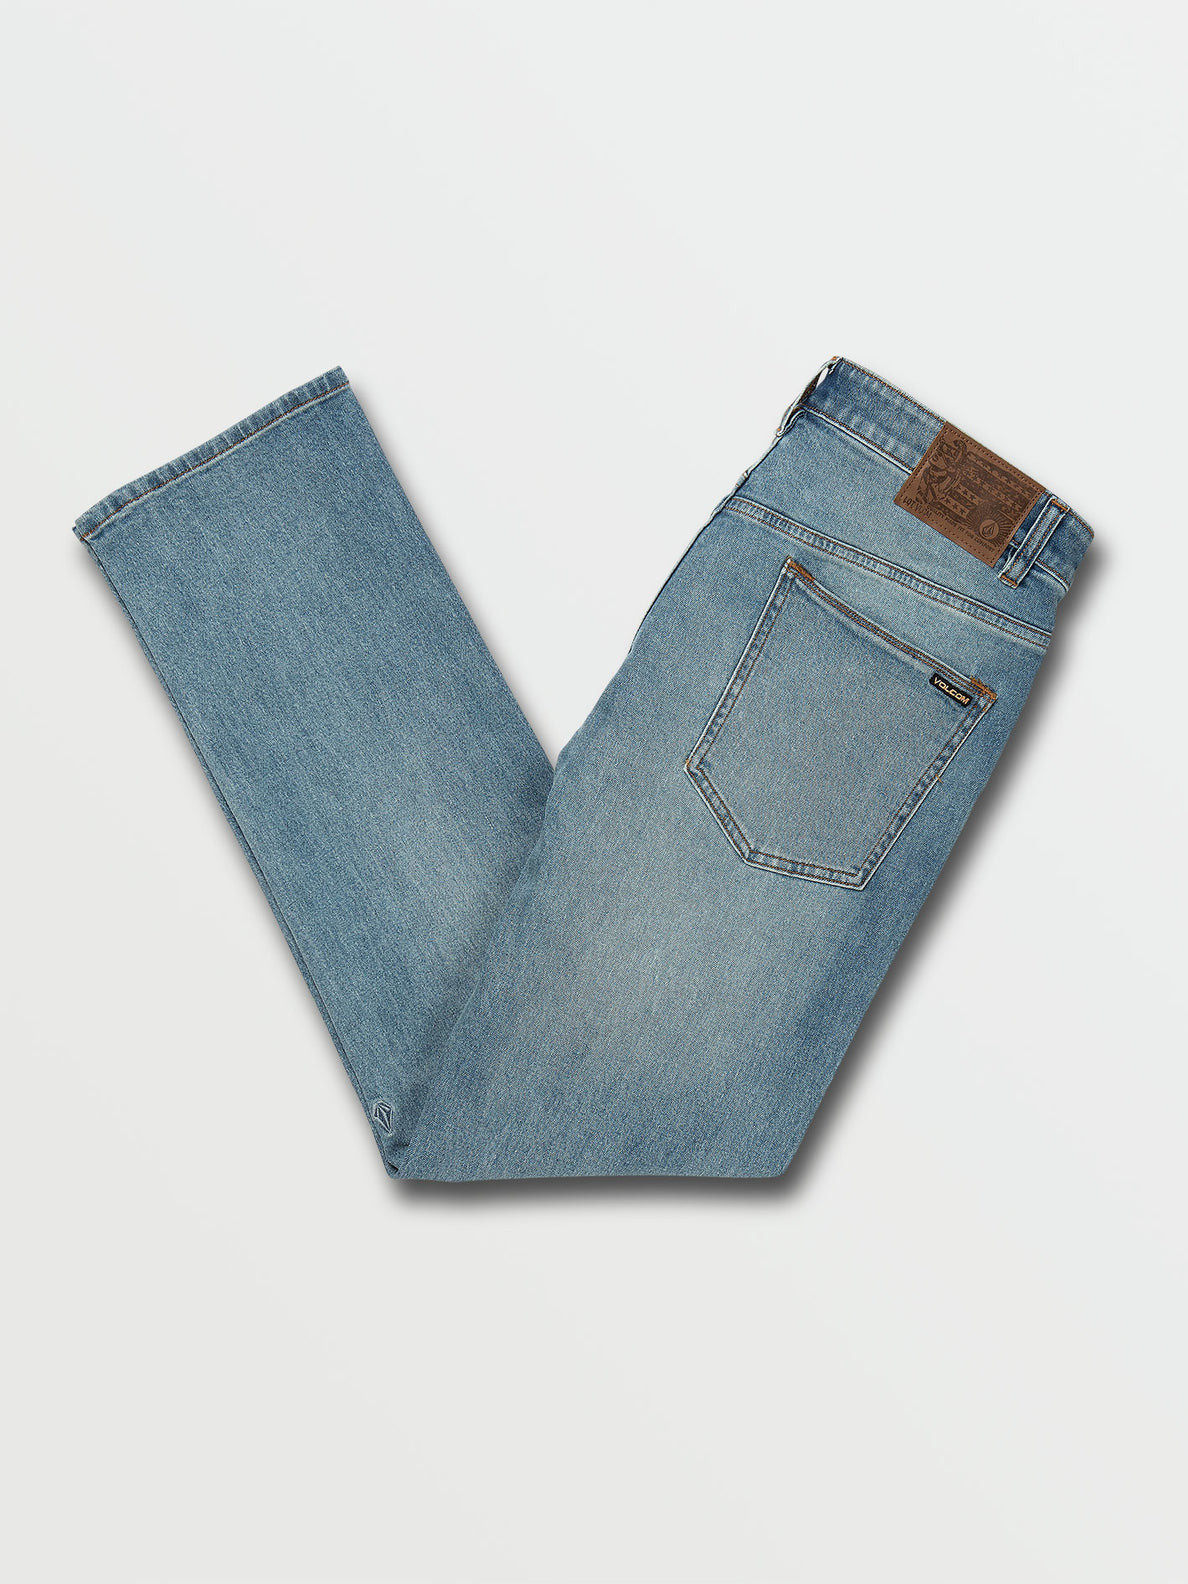 Solver Modern Fit Jeans - Light Wicked Blue